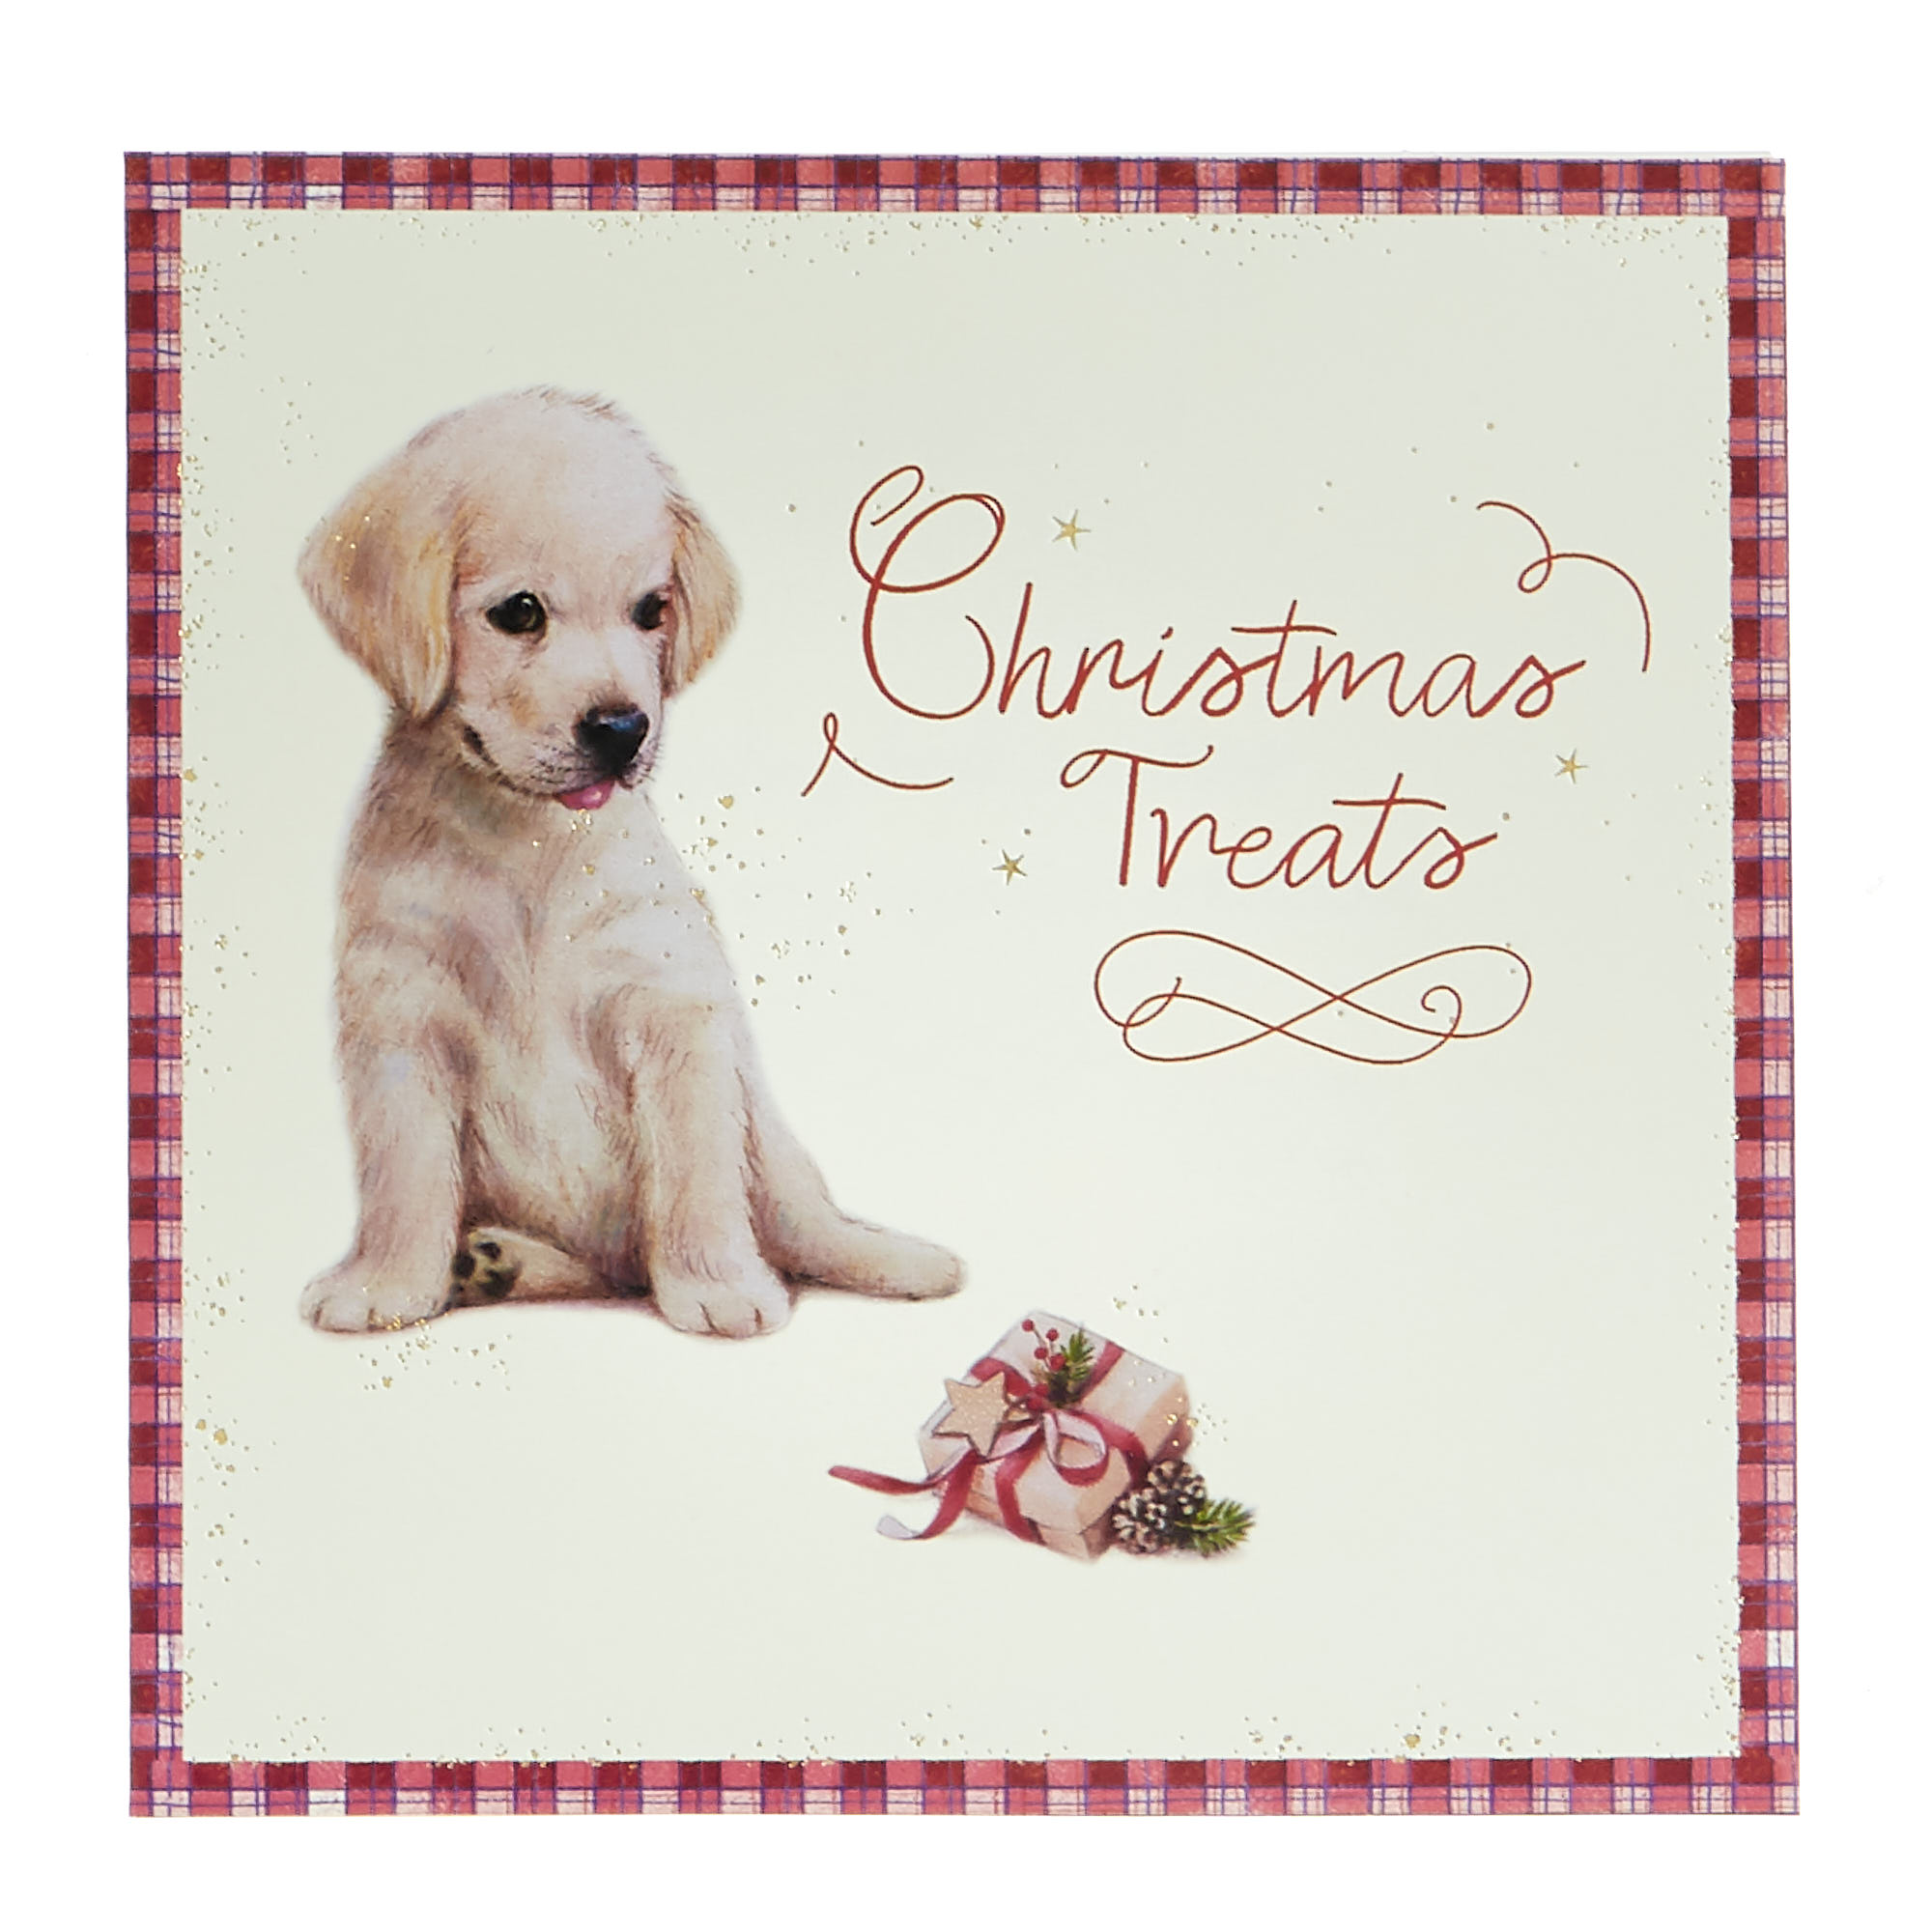 16 Charity Christmas Cards - Festive Pets (4 Designs)